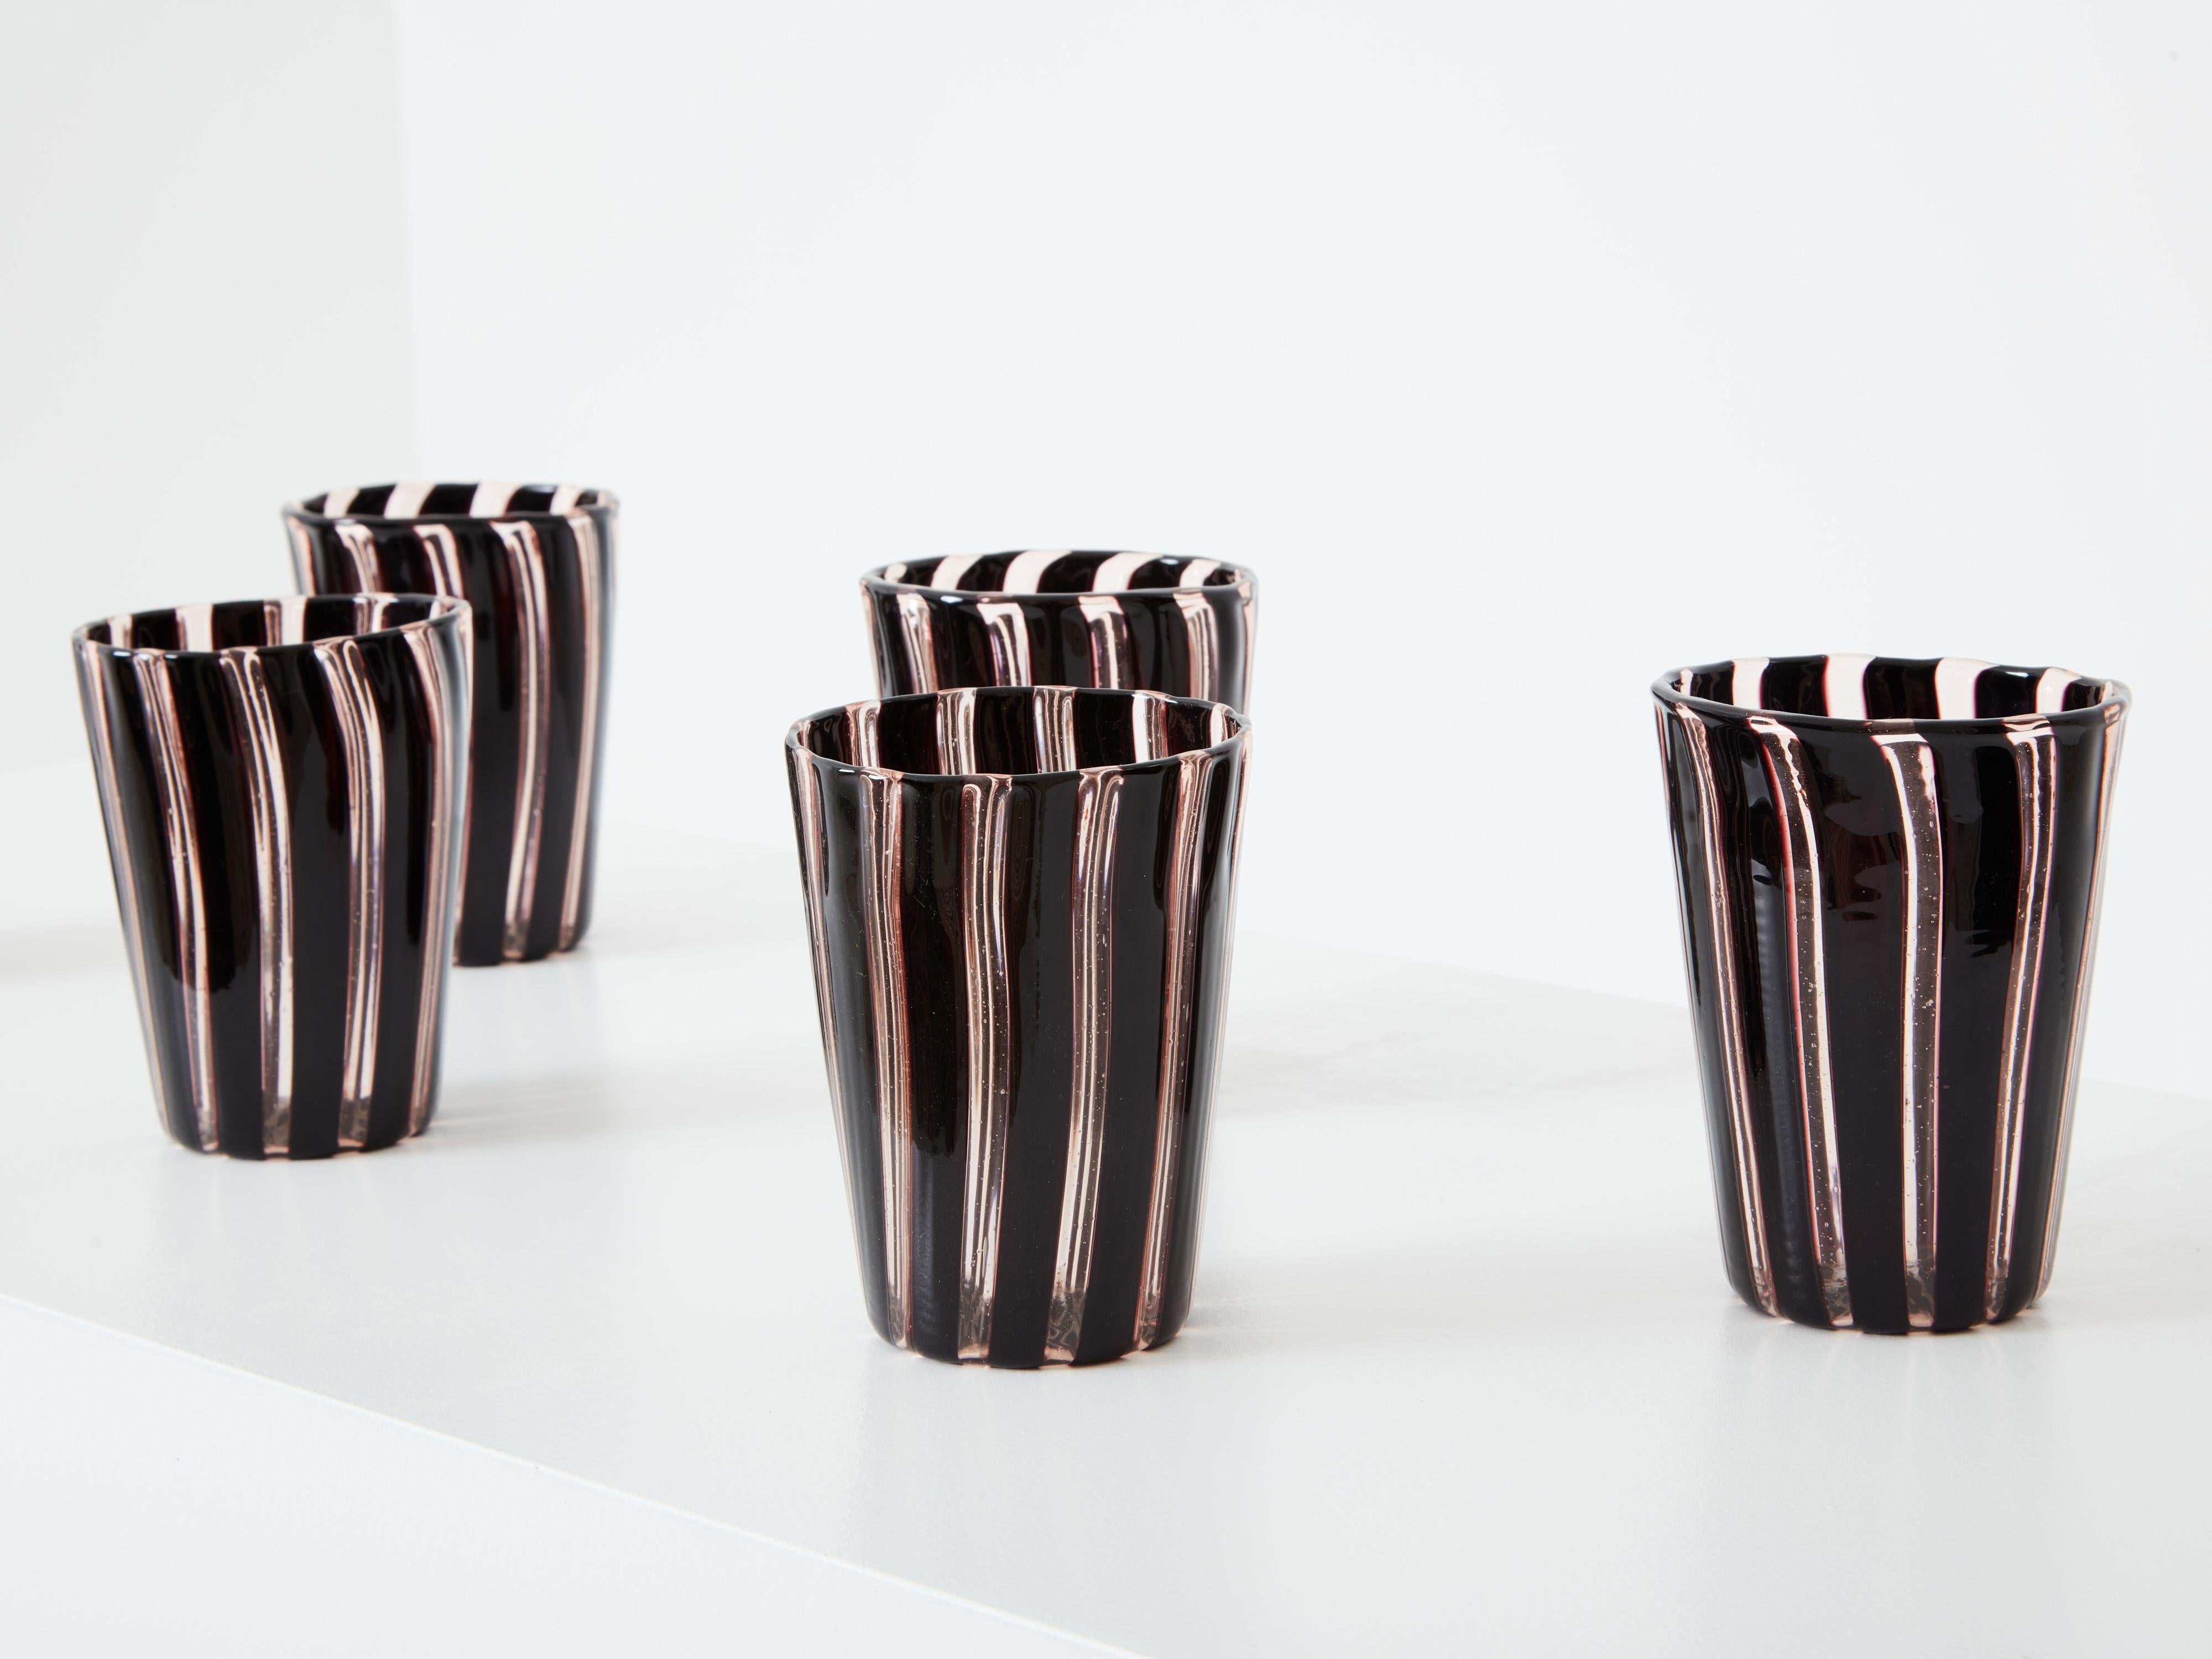 This is a beautiful set of six black and white Murano glass tumblers made in Italy in the 1980s. These are inspired by Gio Ponti and Paolo Venini tumblers “Canne” models from the Morandiana series. This beautiful set of murano pieces has